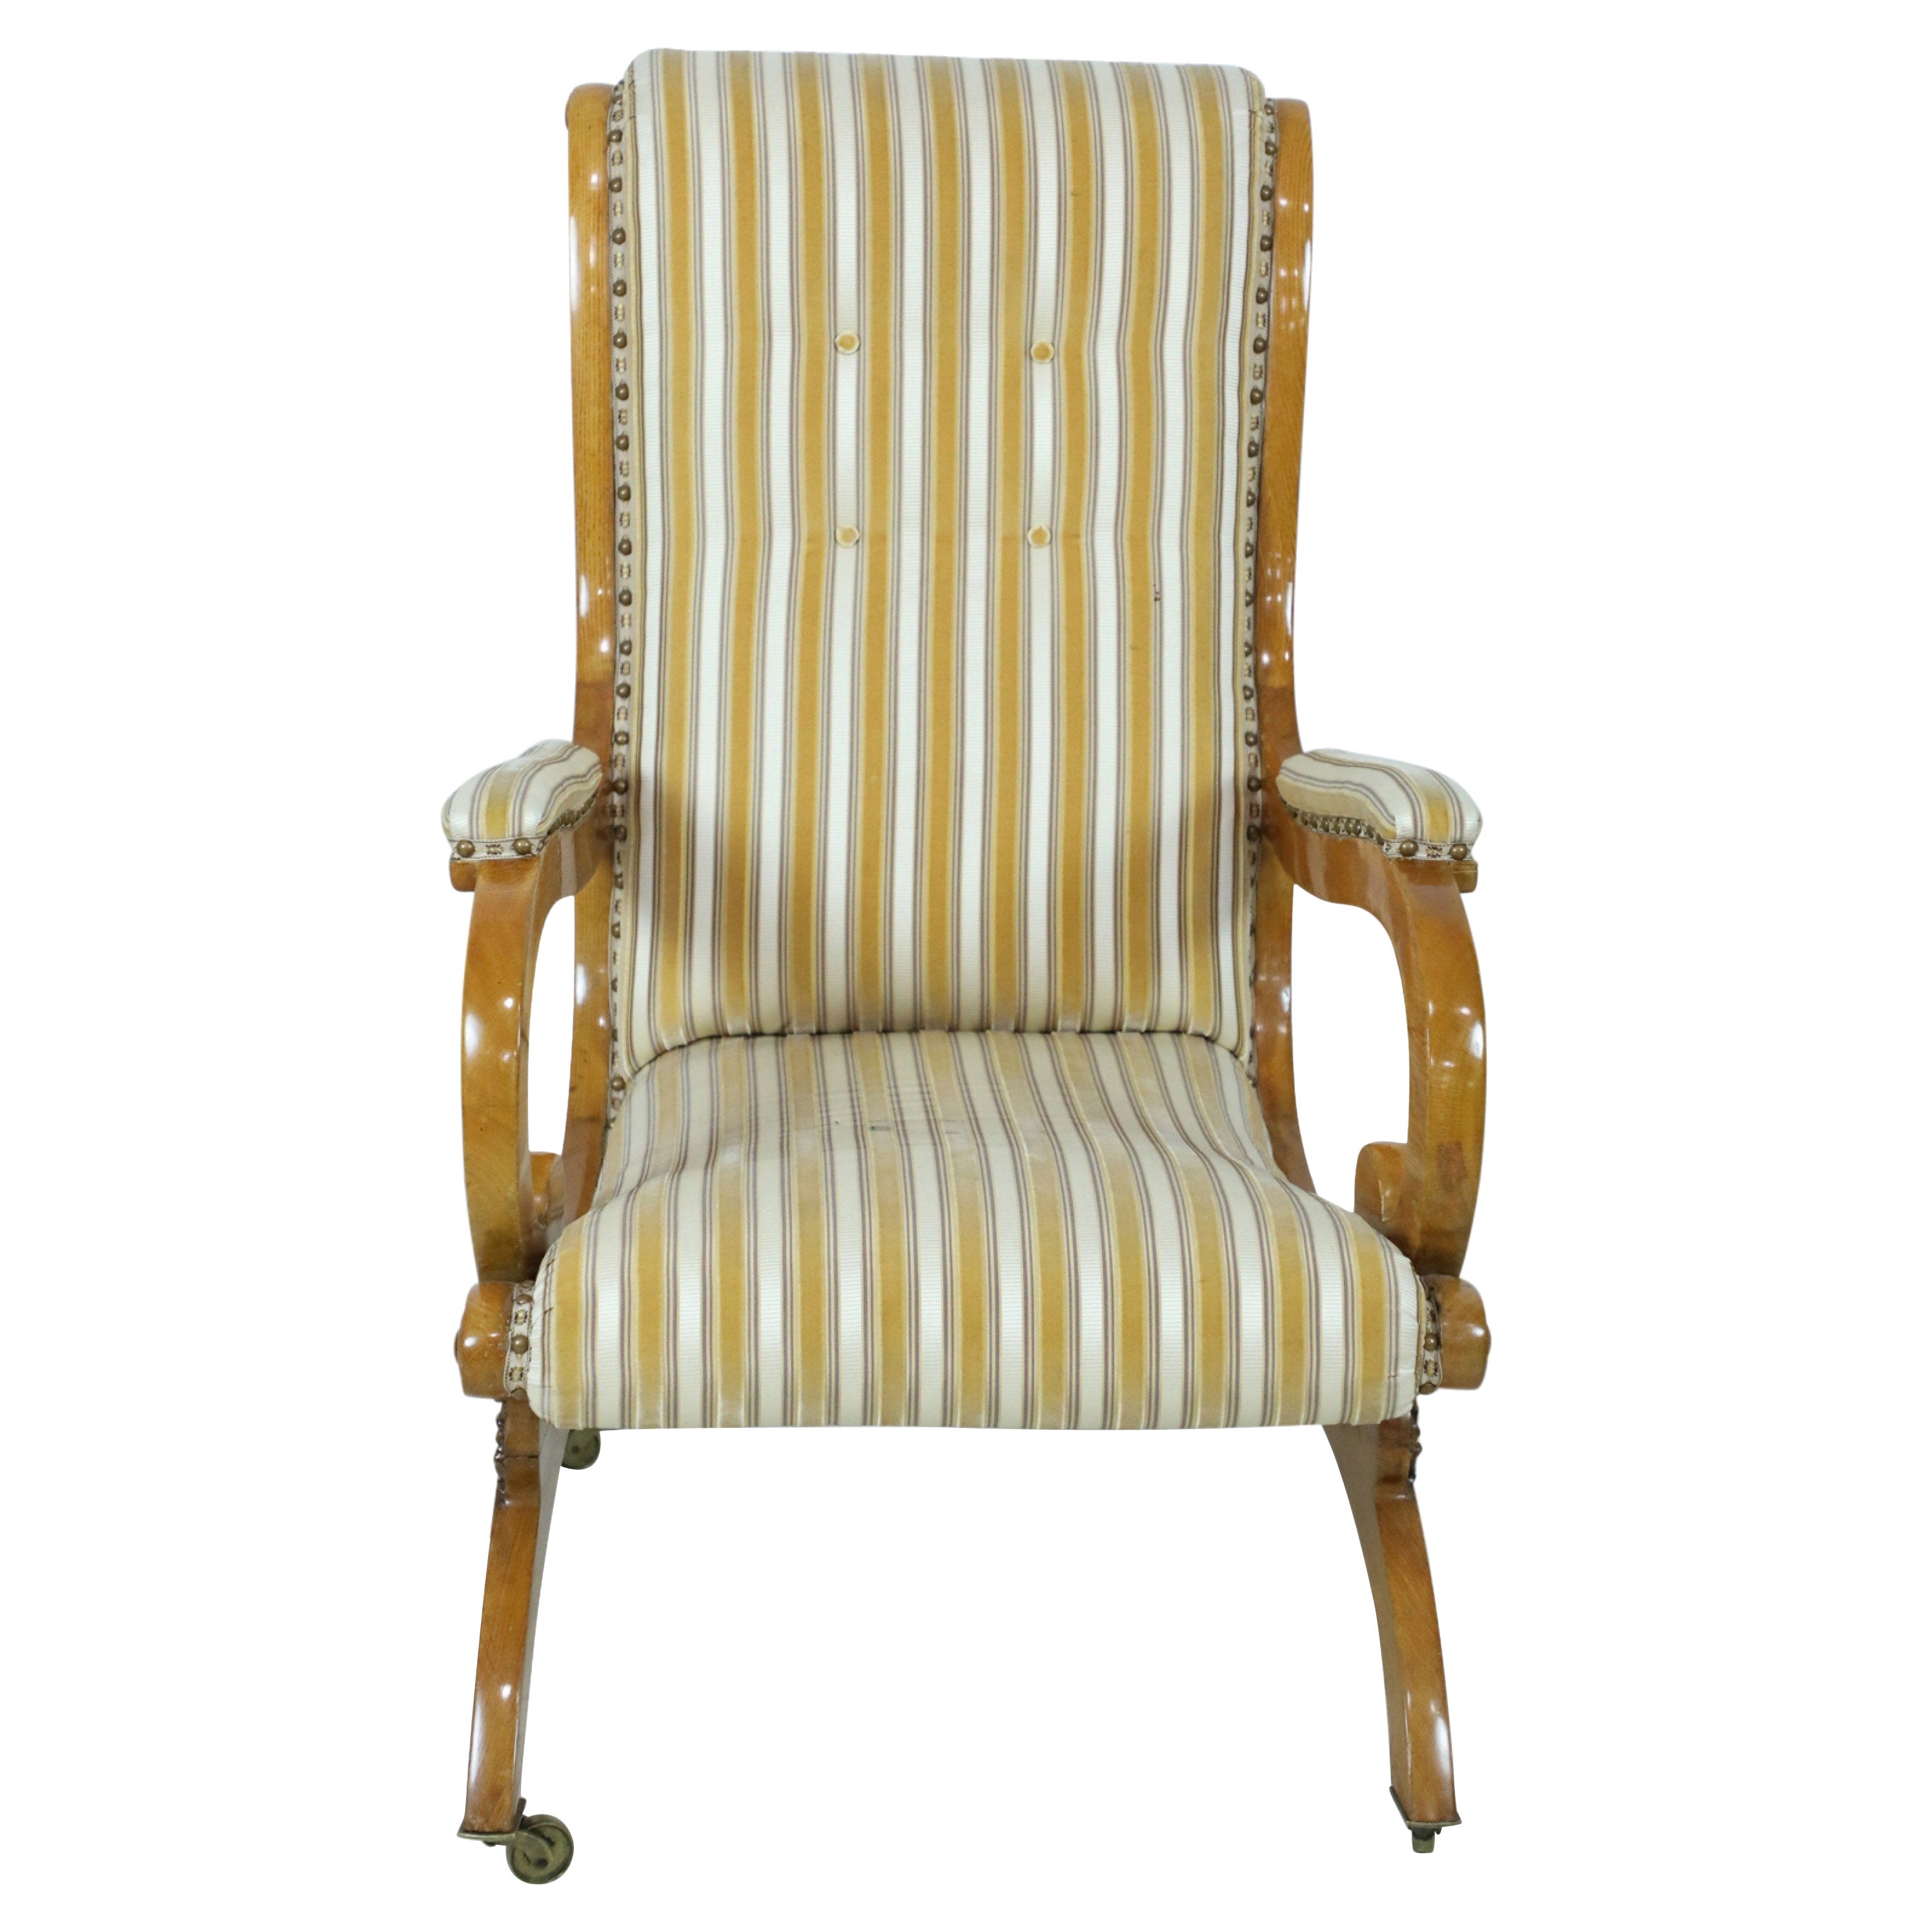 English Victorian Blond Wood Scroll Armchair with Striped Upholstery For Sale